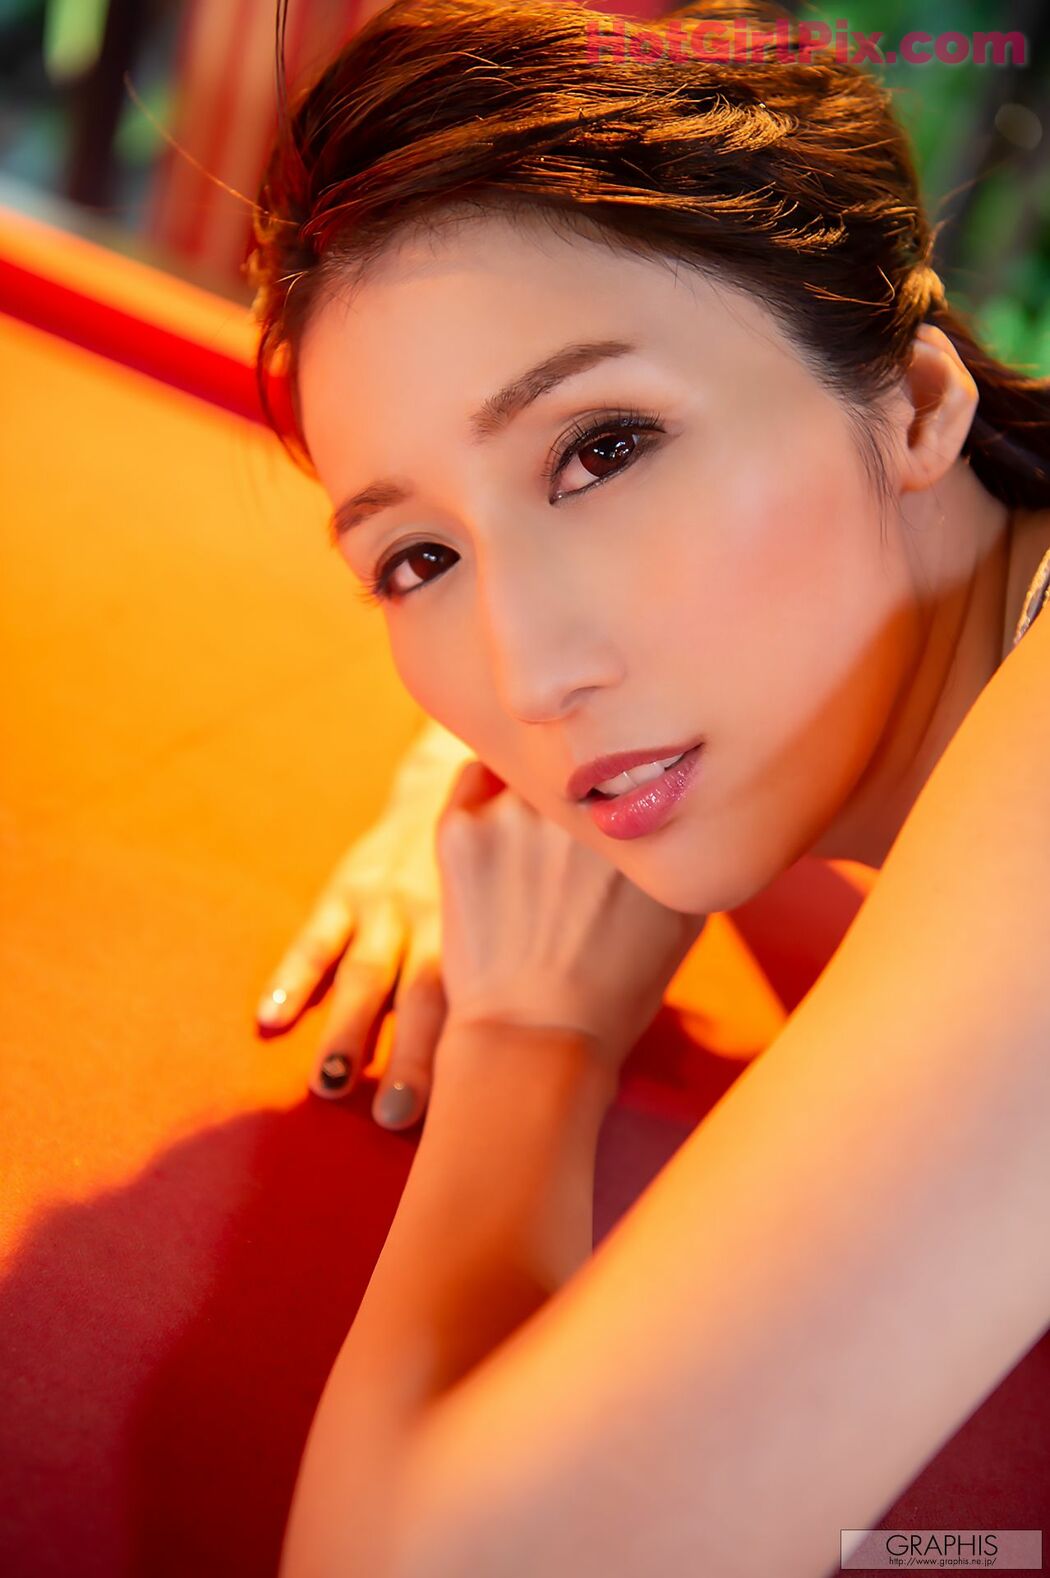 [Graphis] Special - JULIA Kyoka《The Cool Beauty》